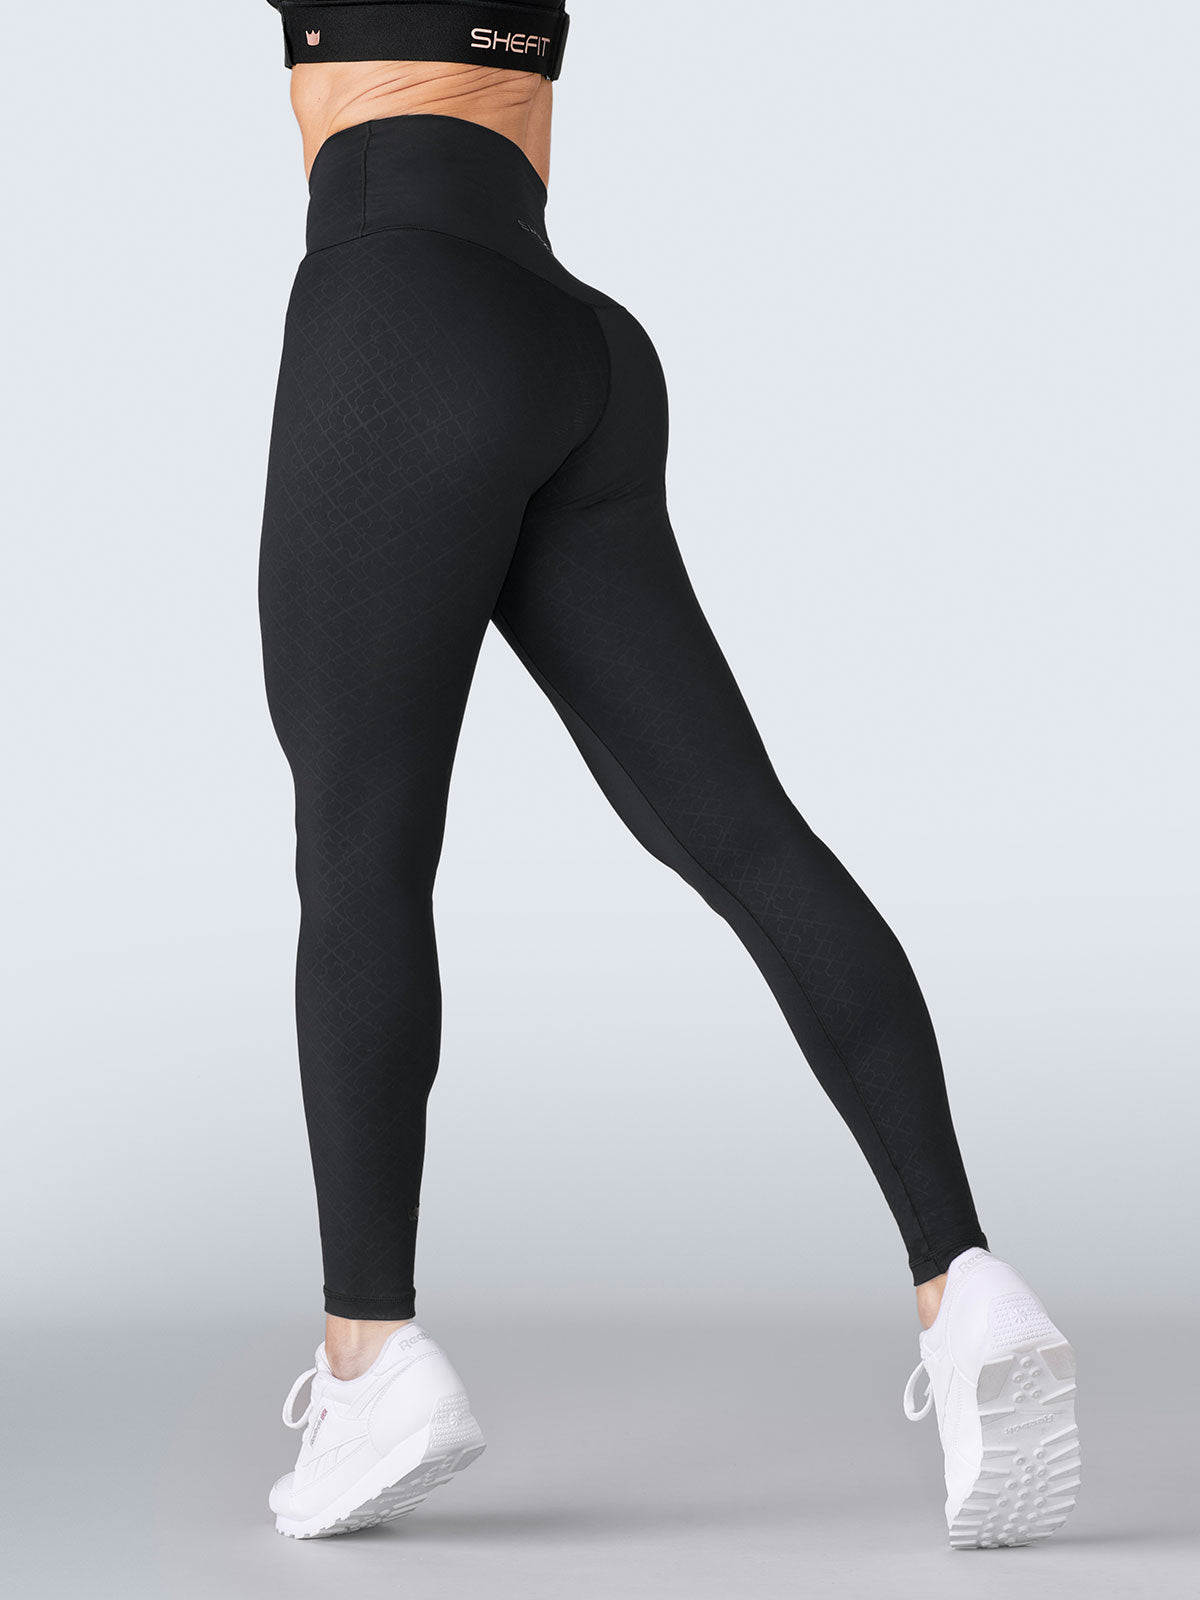 925 Fit Haute & Heavy Seamless Legging Solid Green 9 Two 5 Fit One